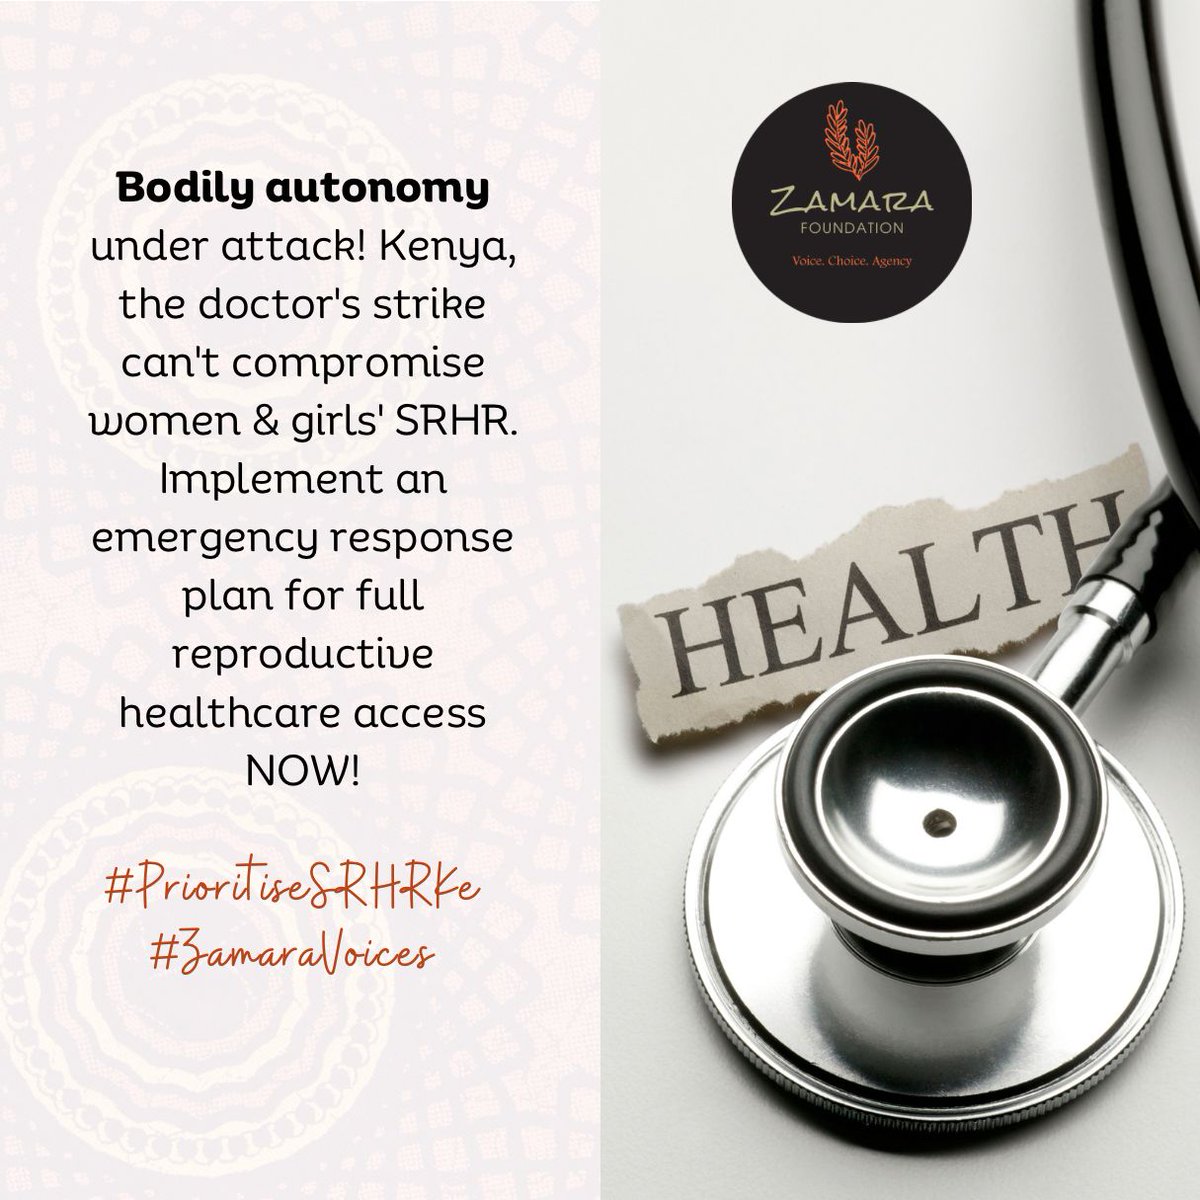 Bodily autonomy includes the right to make decisions about whether to have children,when to have them,how many,as well as access to comprehensive reproductive health care, including contraception,abortion,& maternal health services.#PrioritiseSRHRKe #Zamaravoices @Zamara_fdn